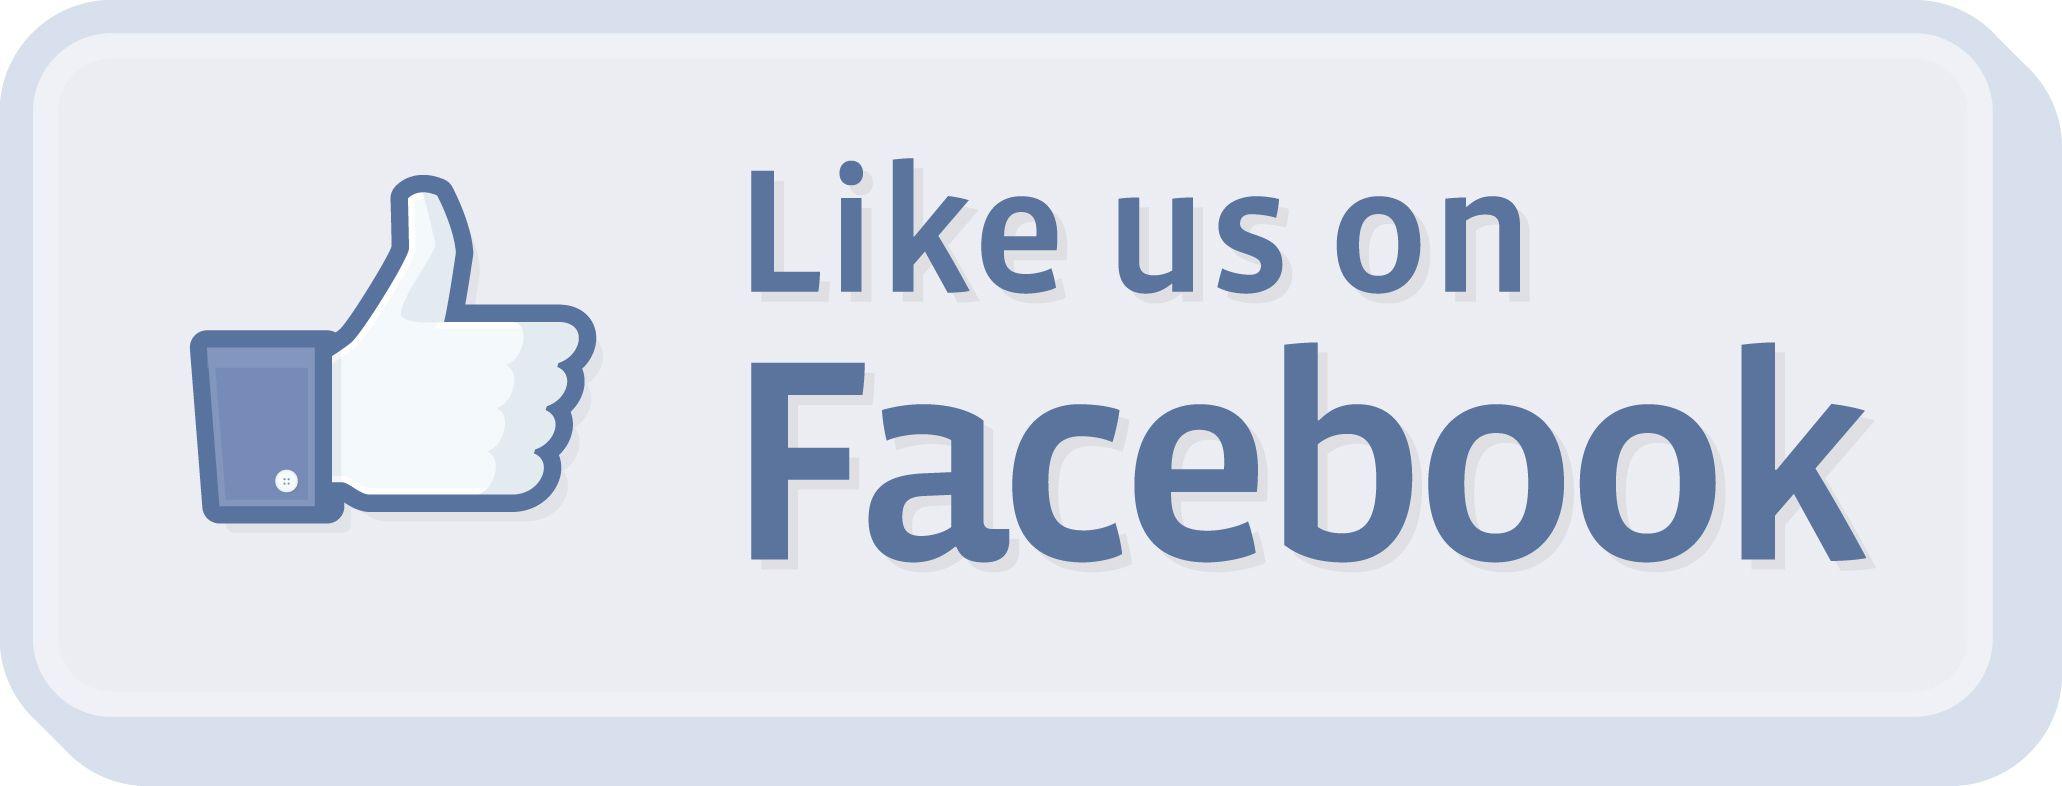 Like Us On Facebook Small Logo - Financial Aid Image